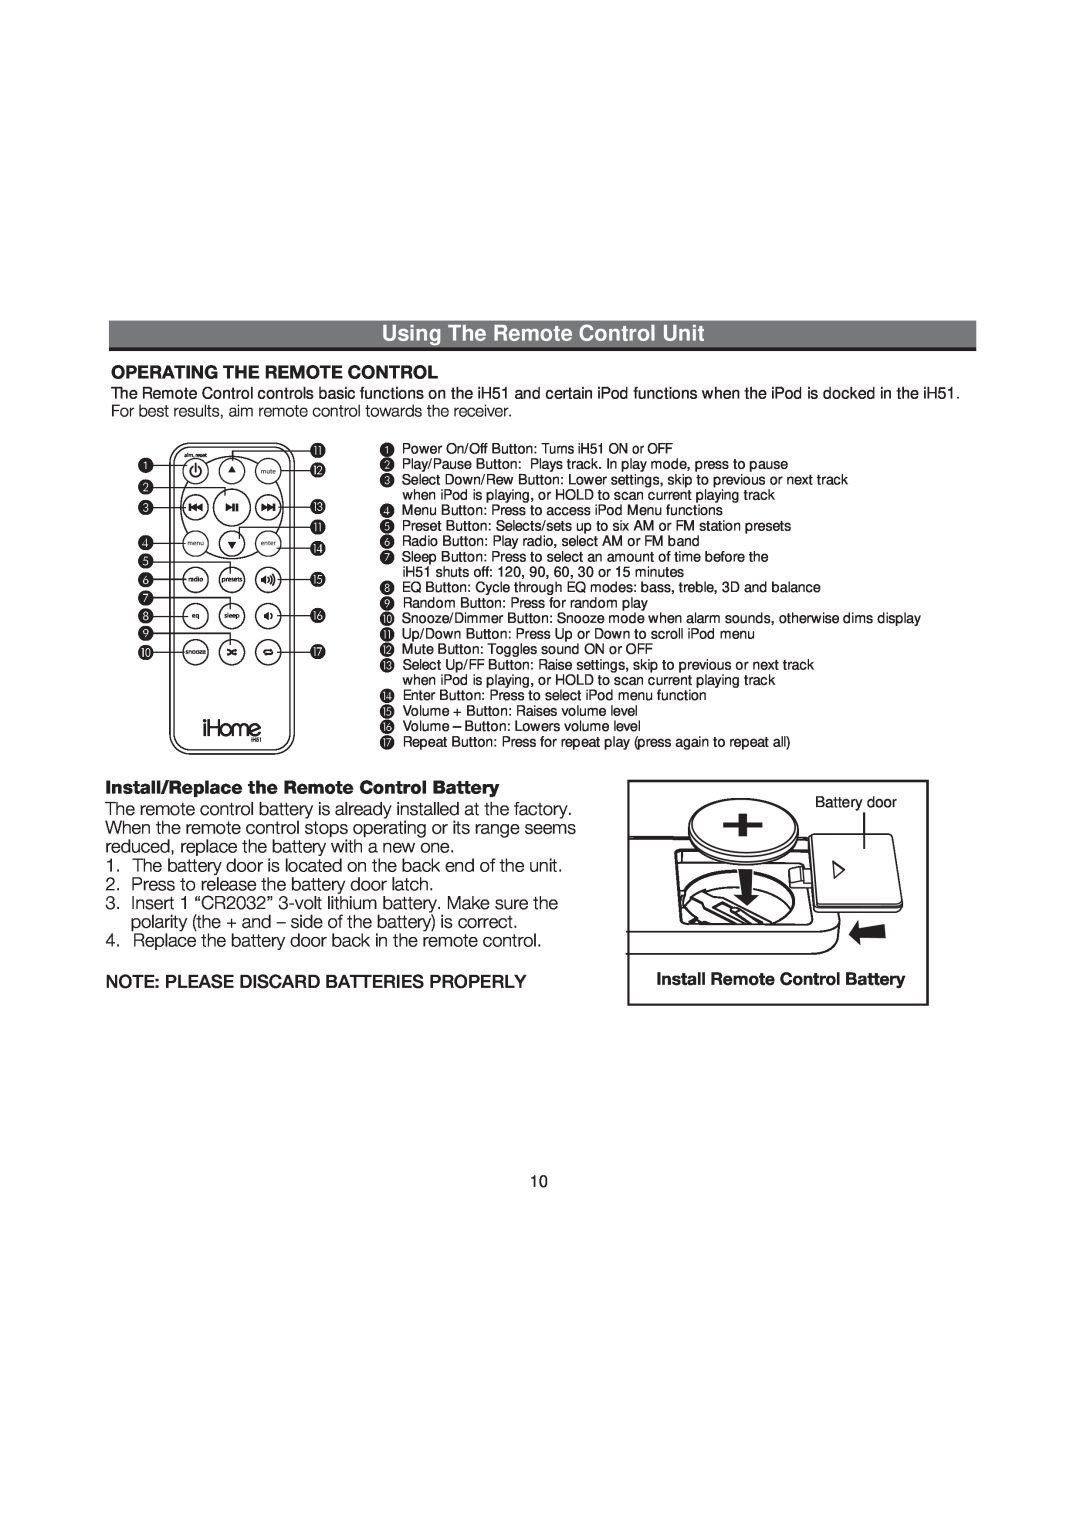 iHome iH51 manual Using The Remote Control Unit, Operating The Remote Control, Install/Replace the Remote Control Battery 